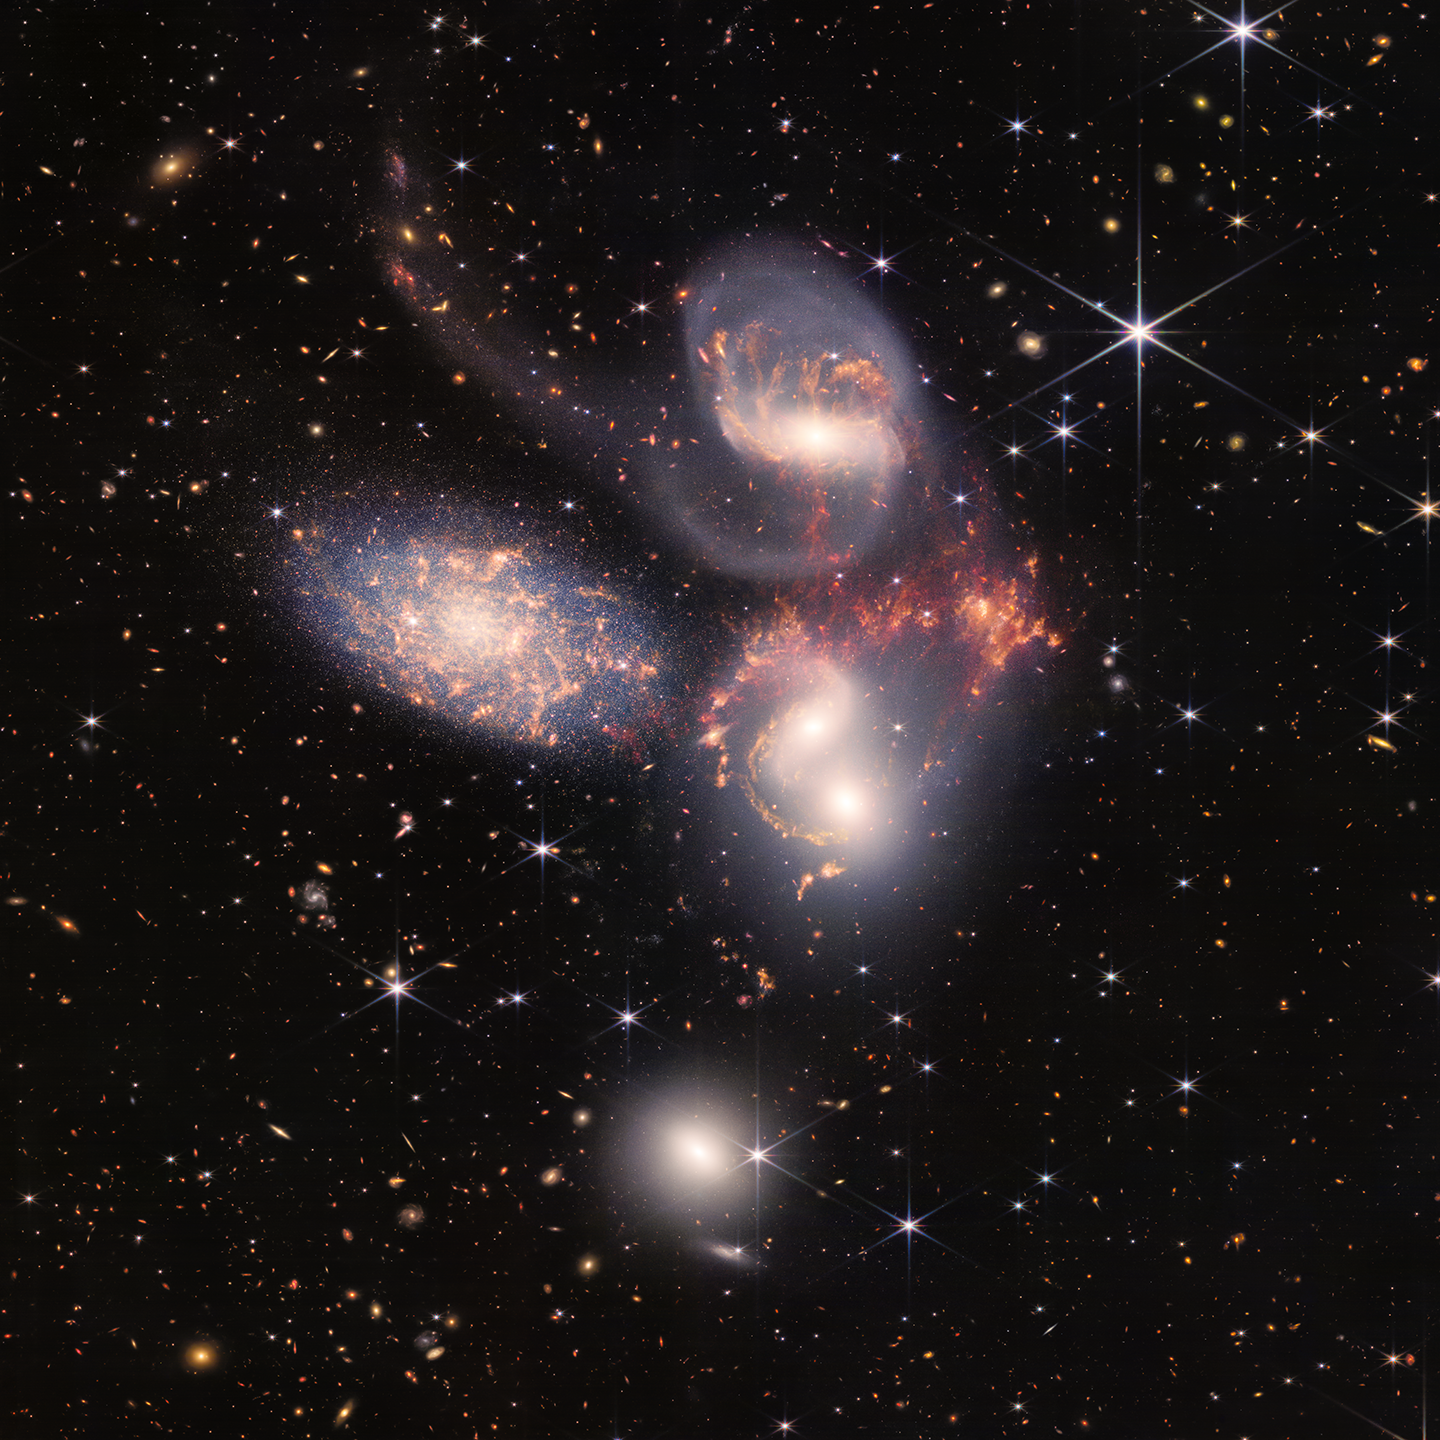 General 1440x1440 space James Webb Space Telescope stars Cluster infrared HCG 92 galaxy Stephan's Quintet